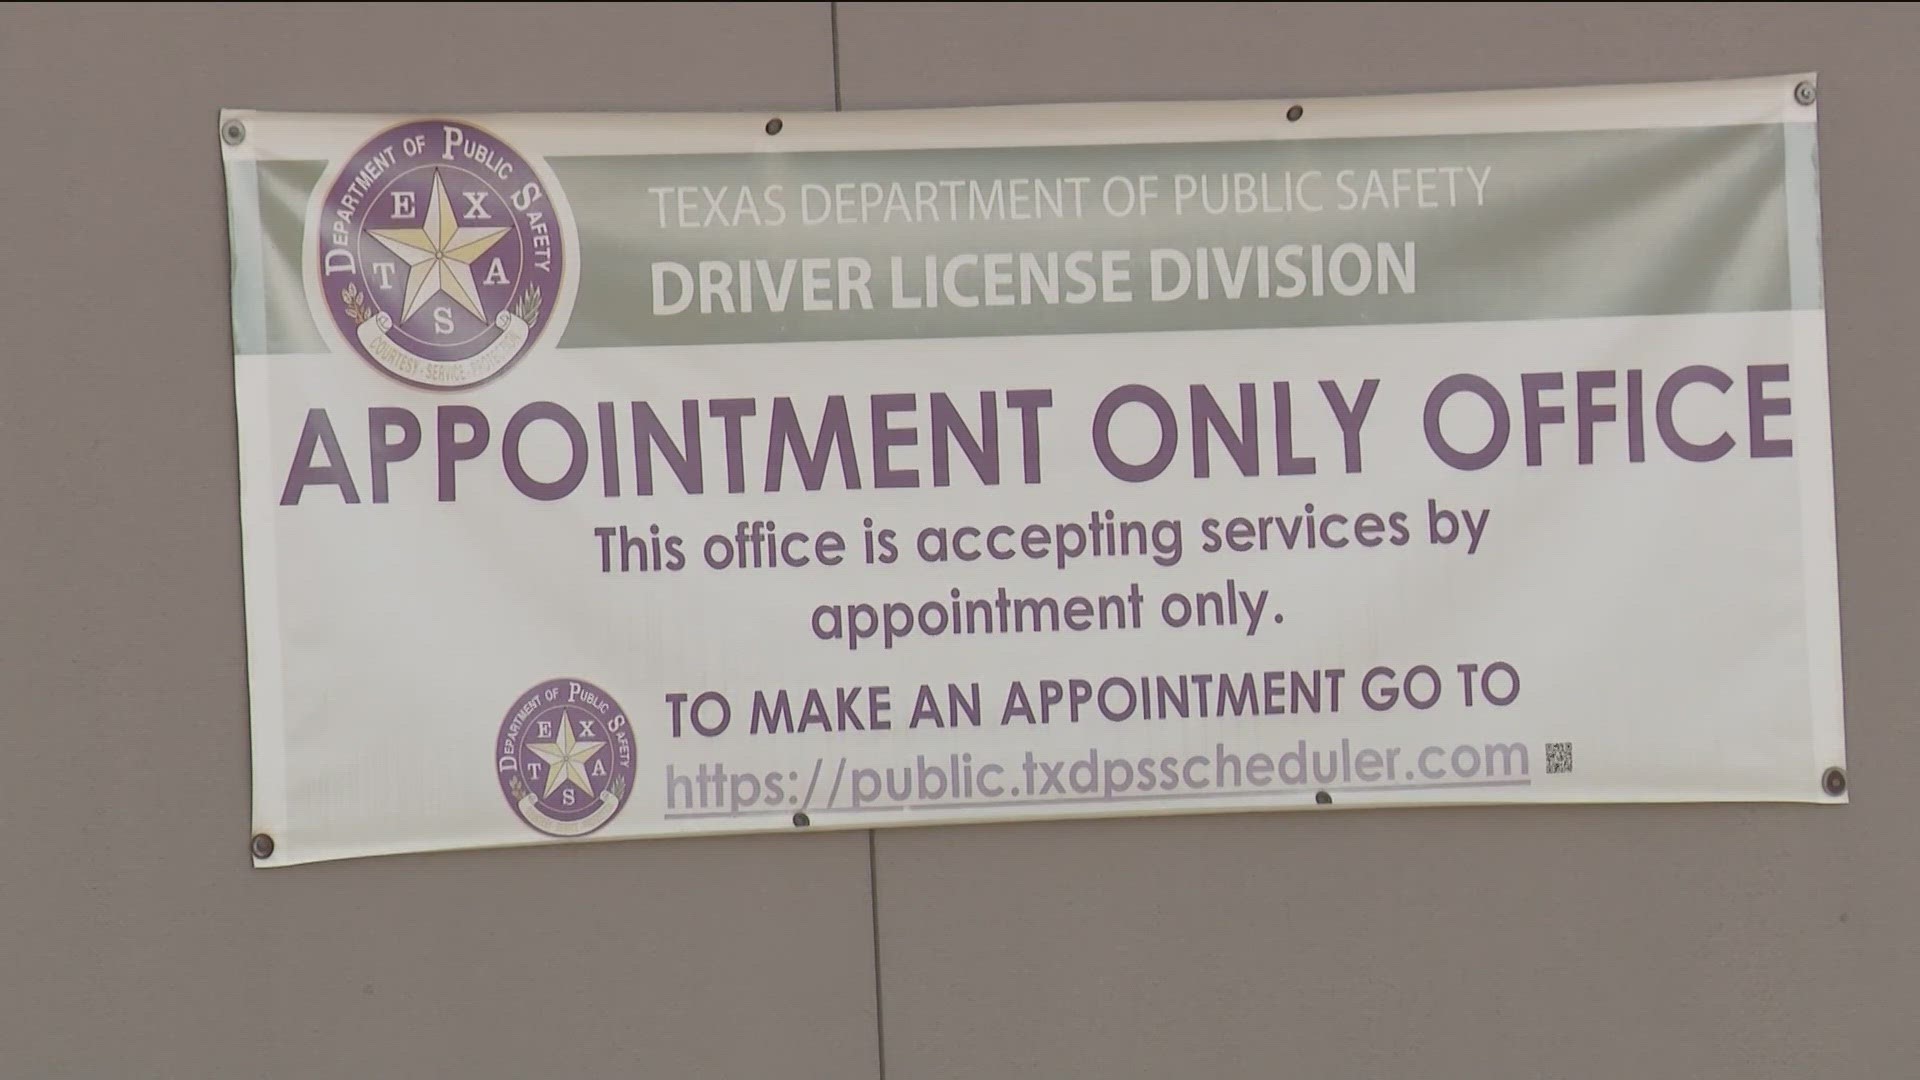 According to DPS, it could take months to get the next available appointment when it comes to obtaining a license or having it renewed.